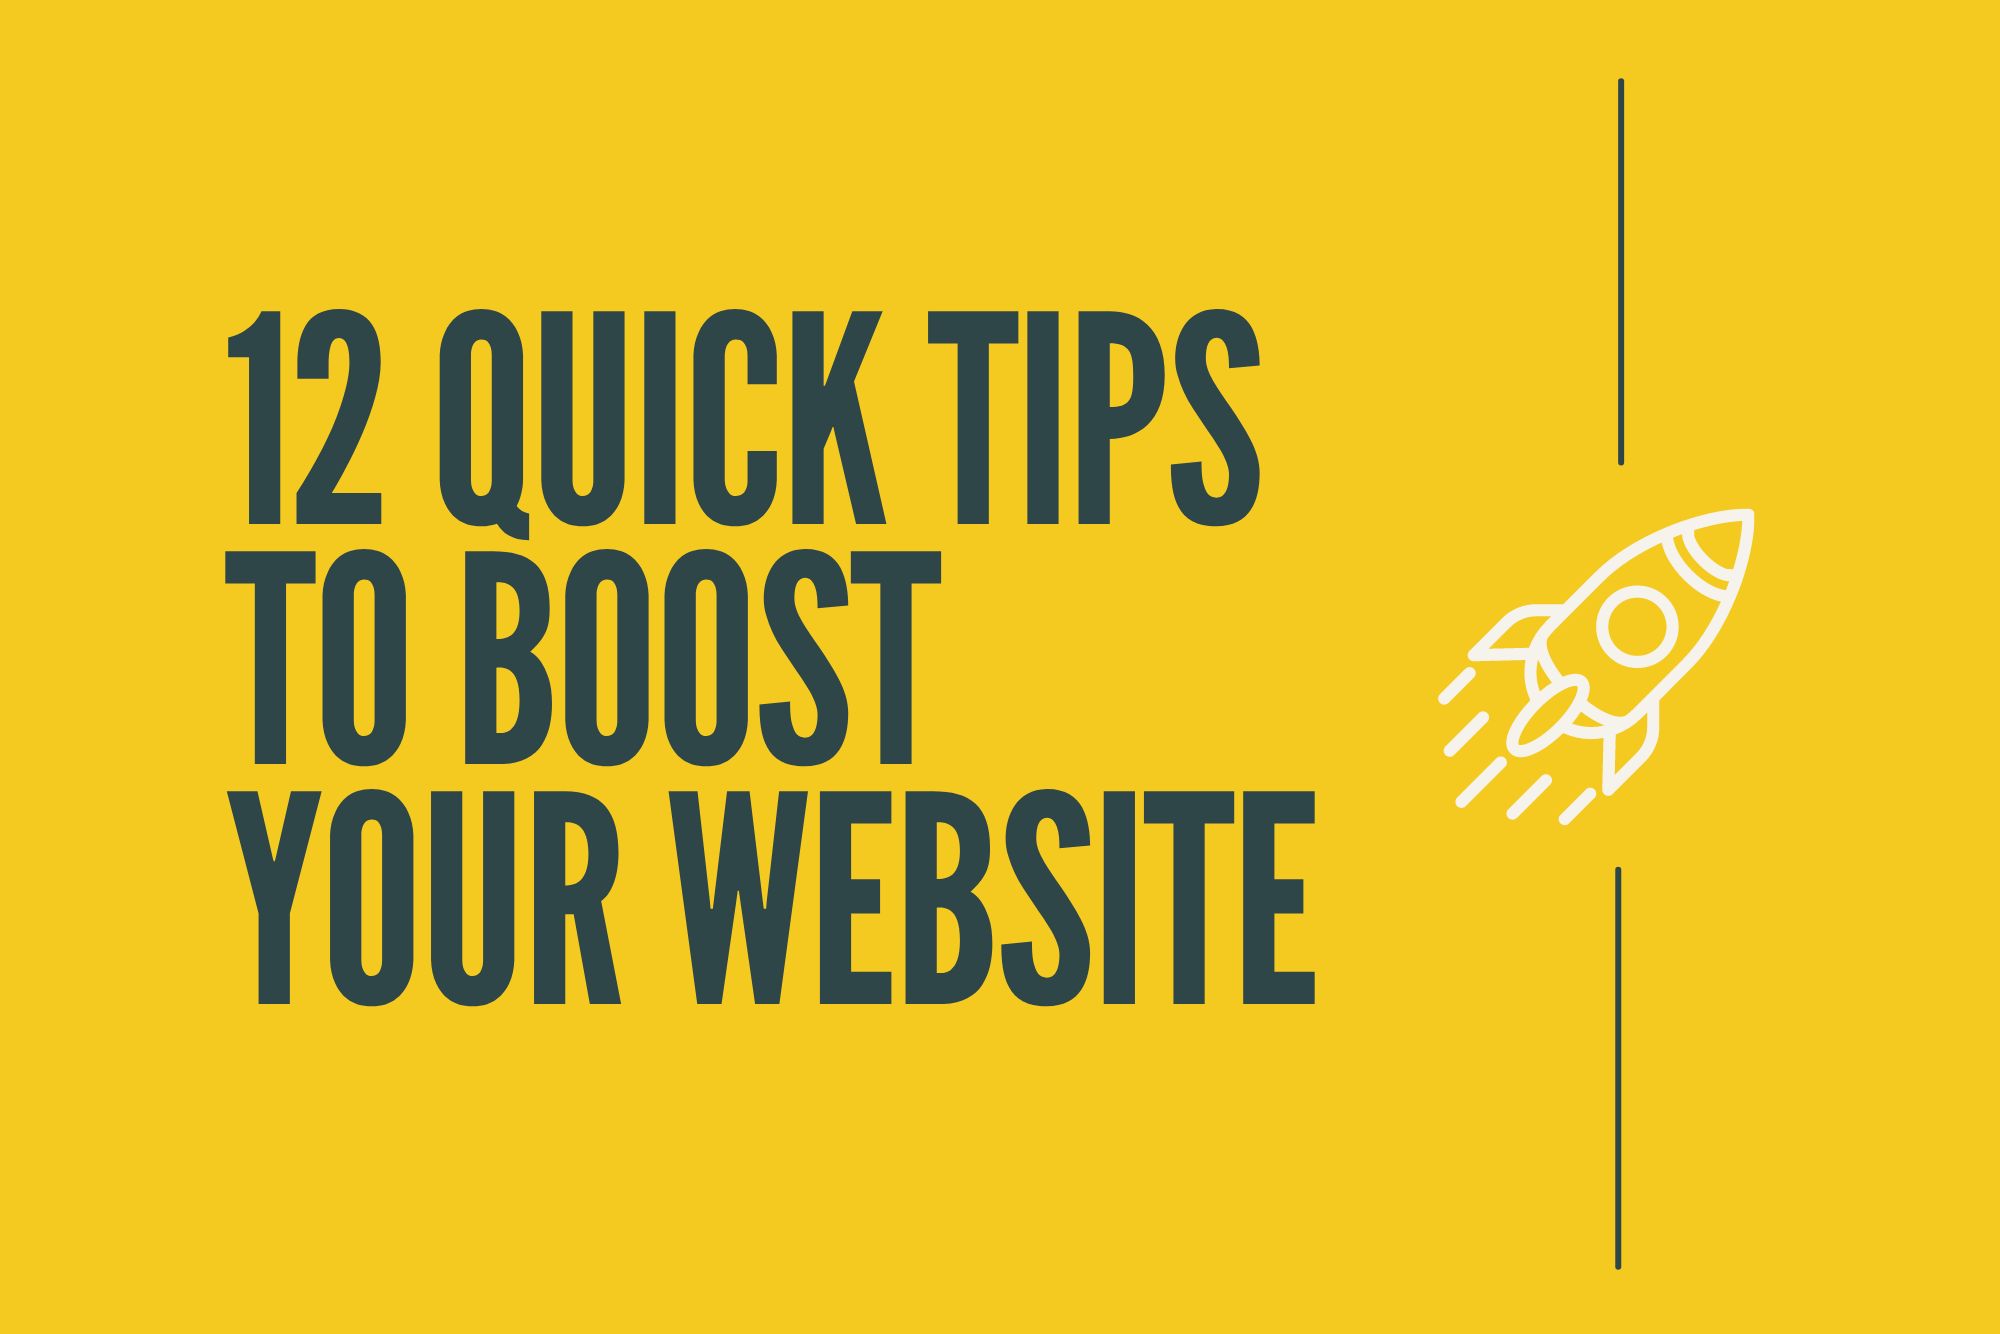 15 Minute Tips On Updating Your Website